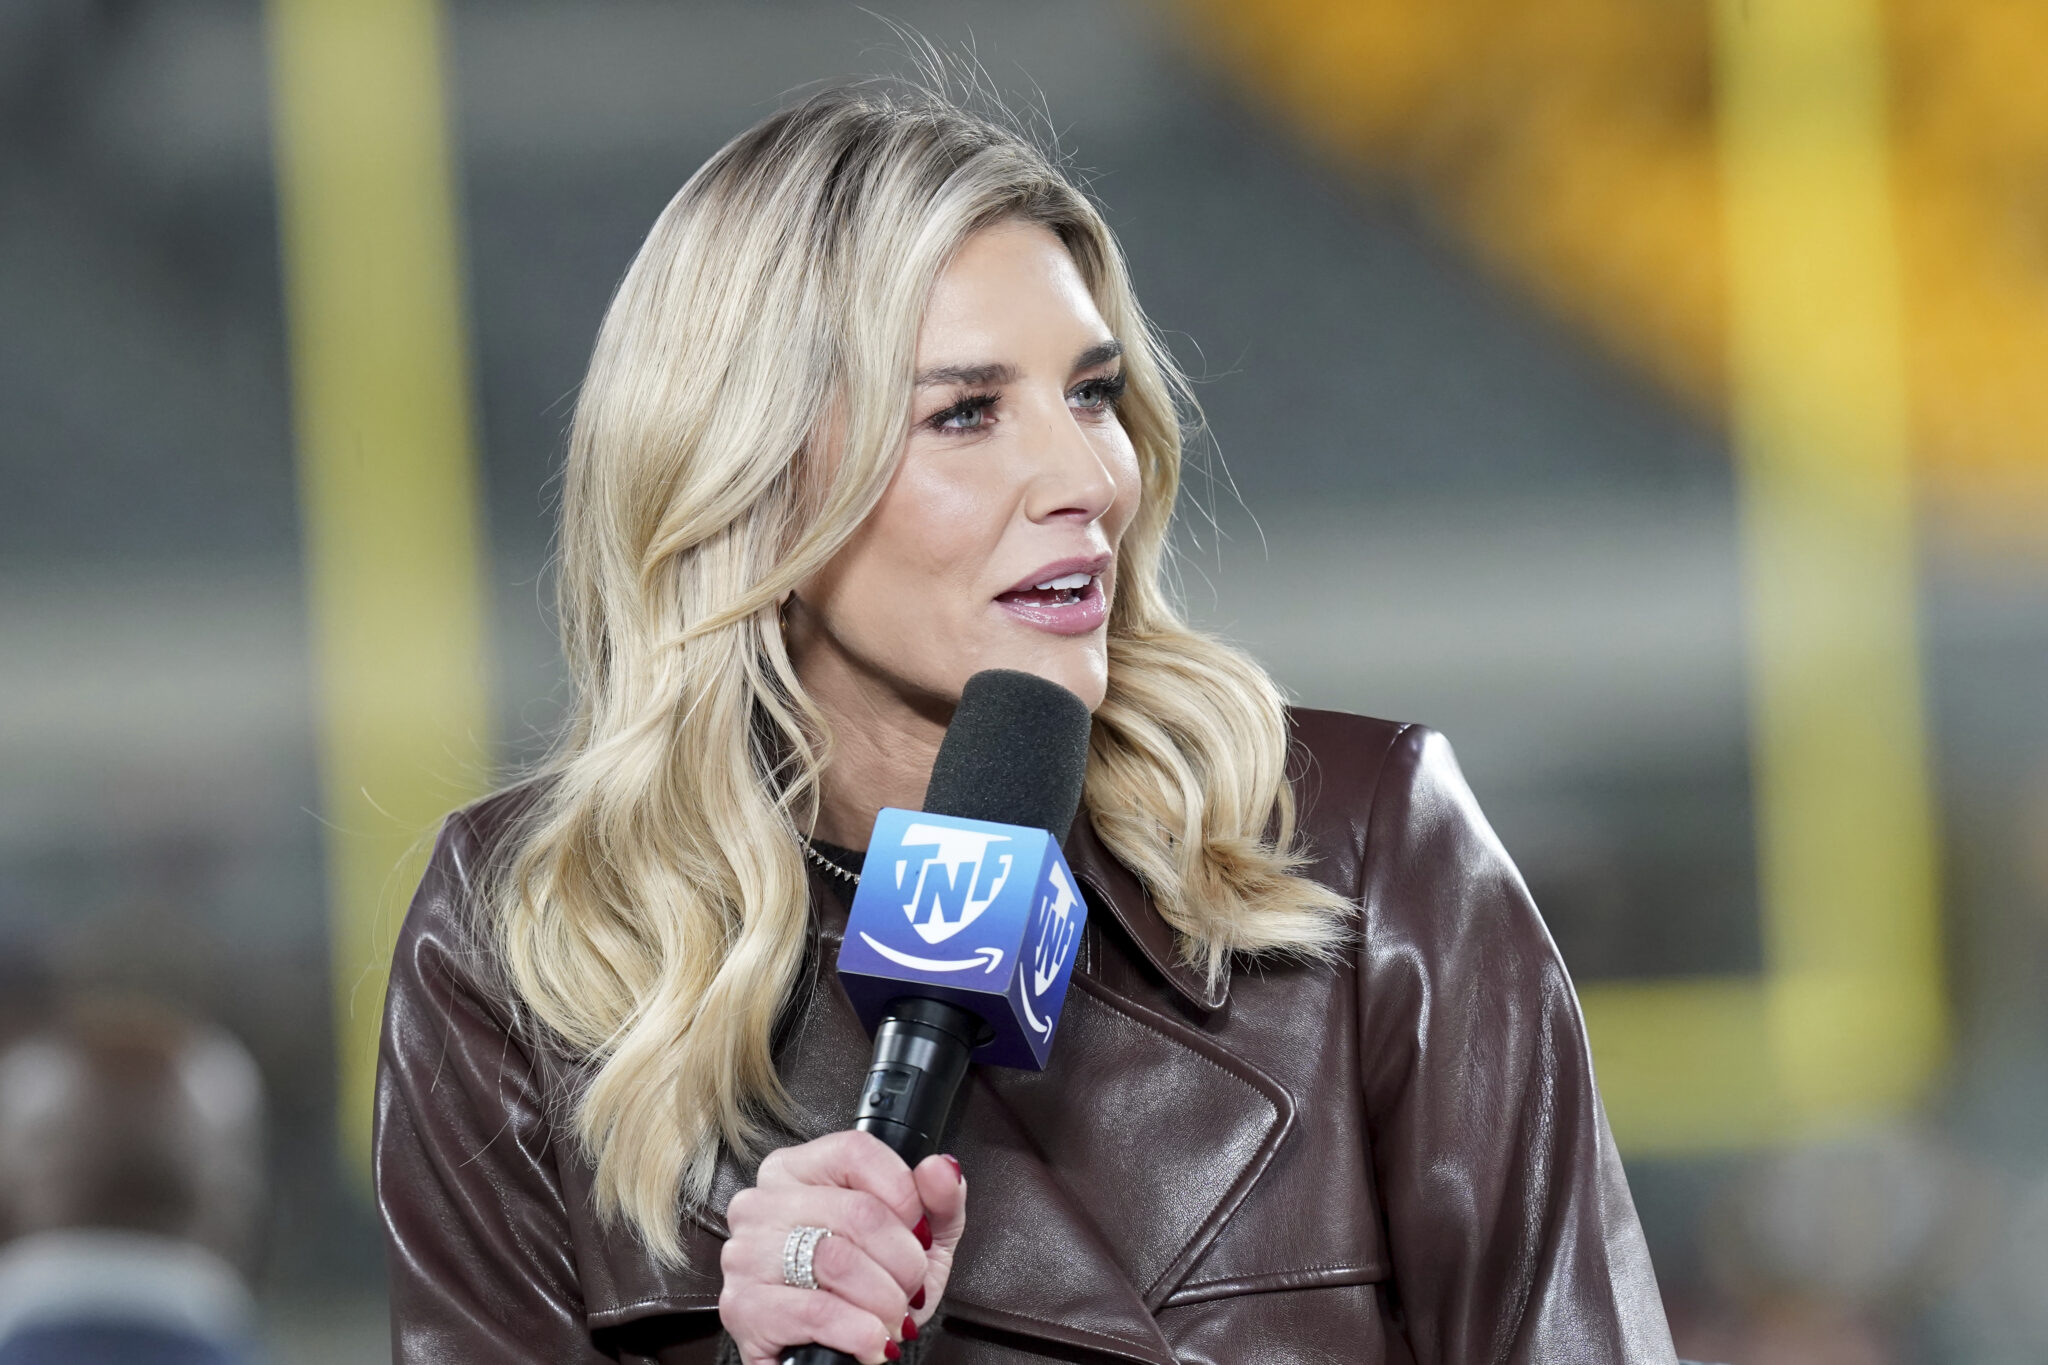 Too Late, Genie out of Bottle: Charissa Thompson Walks Back Admission That She Used to Make Up Sideline Reports (mediaite.com)